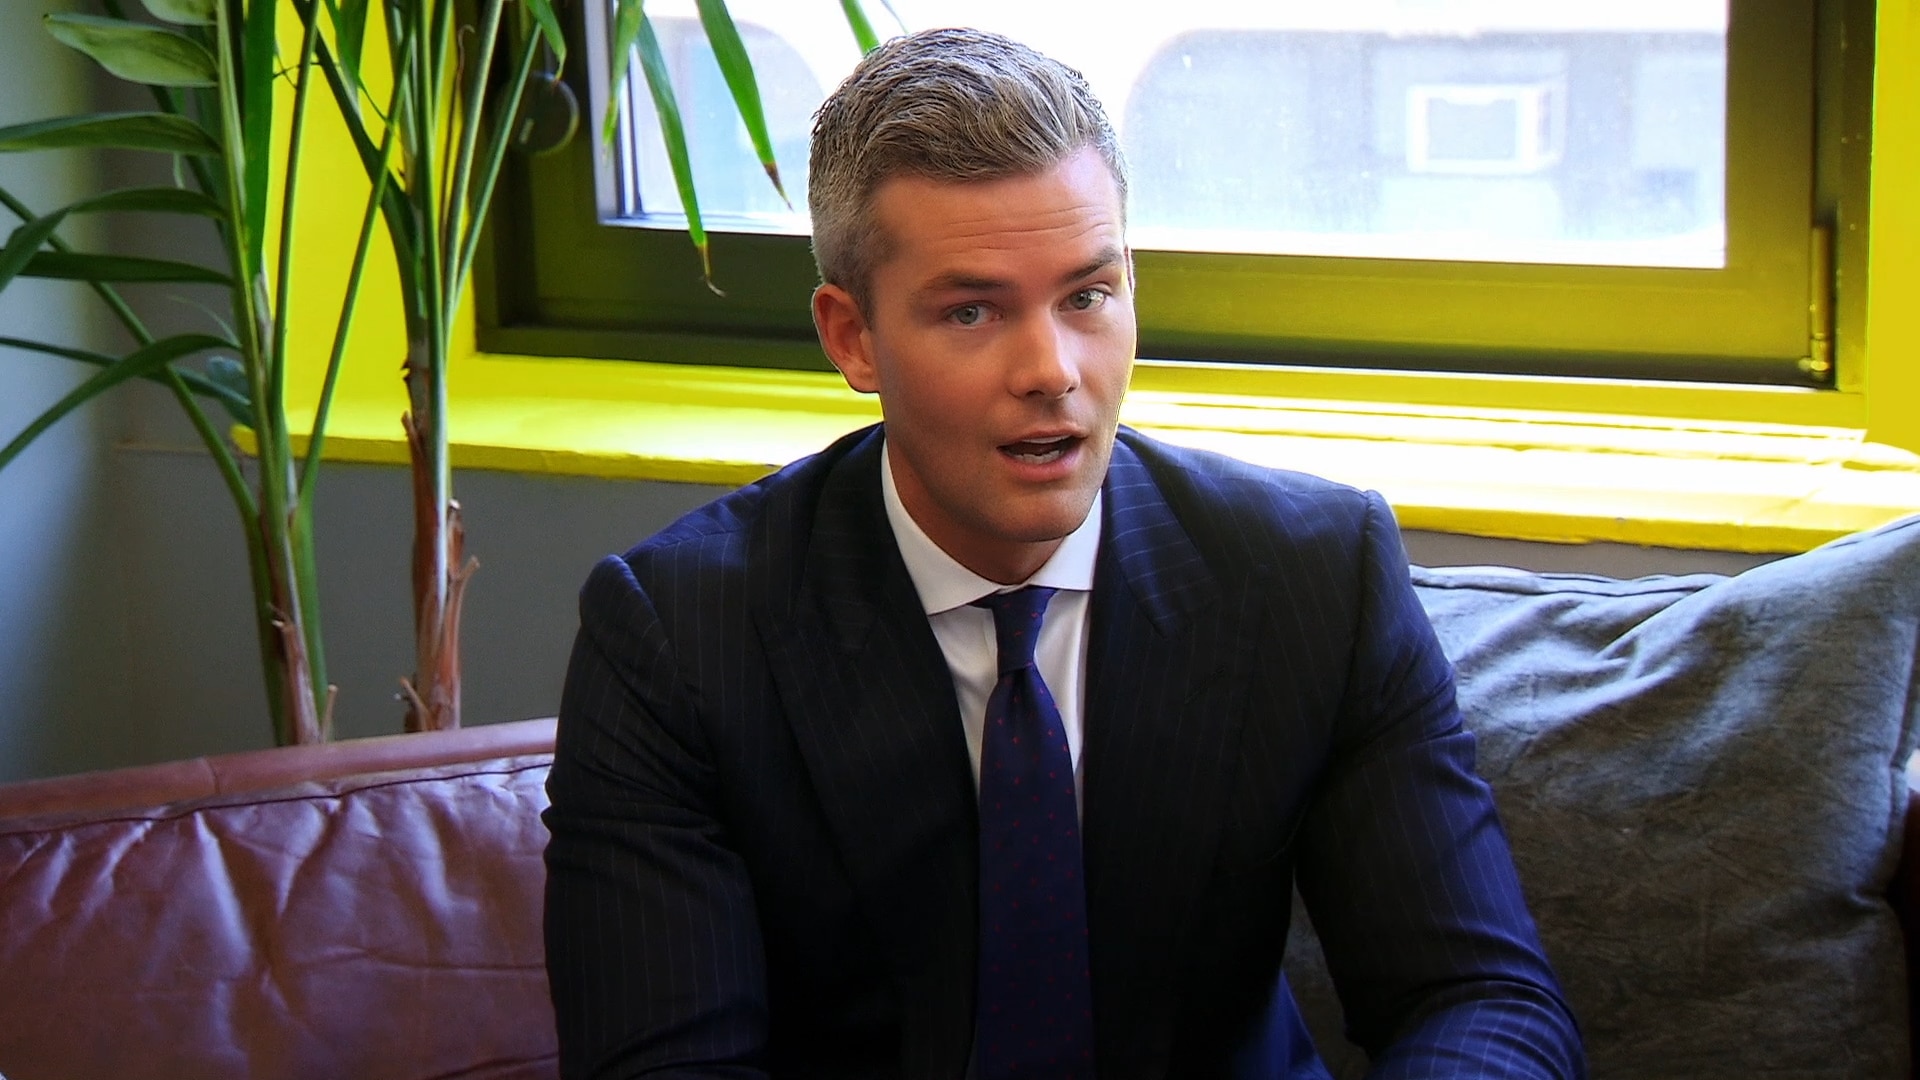 Ryan Serhant Gets Caught in a Super Awkward Situation.